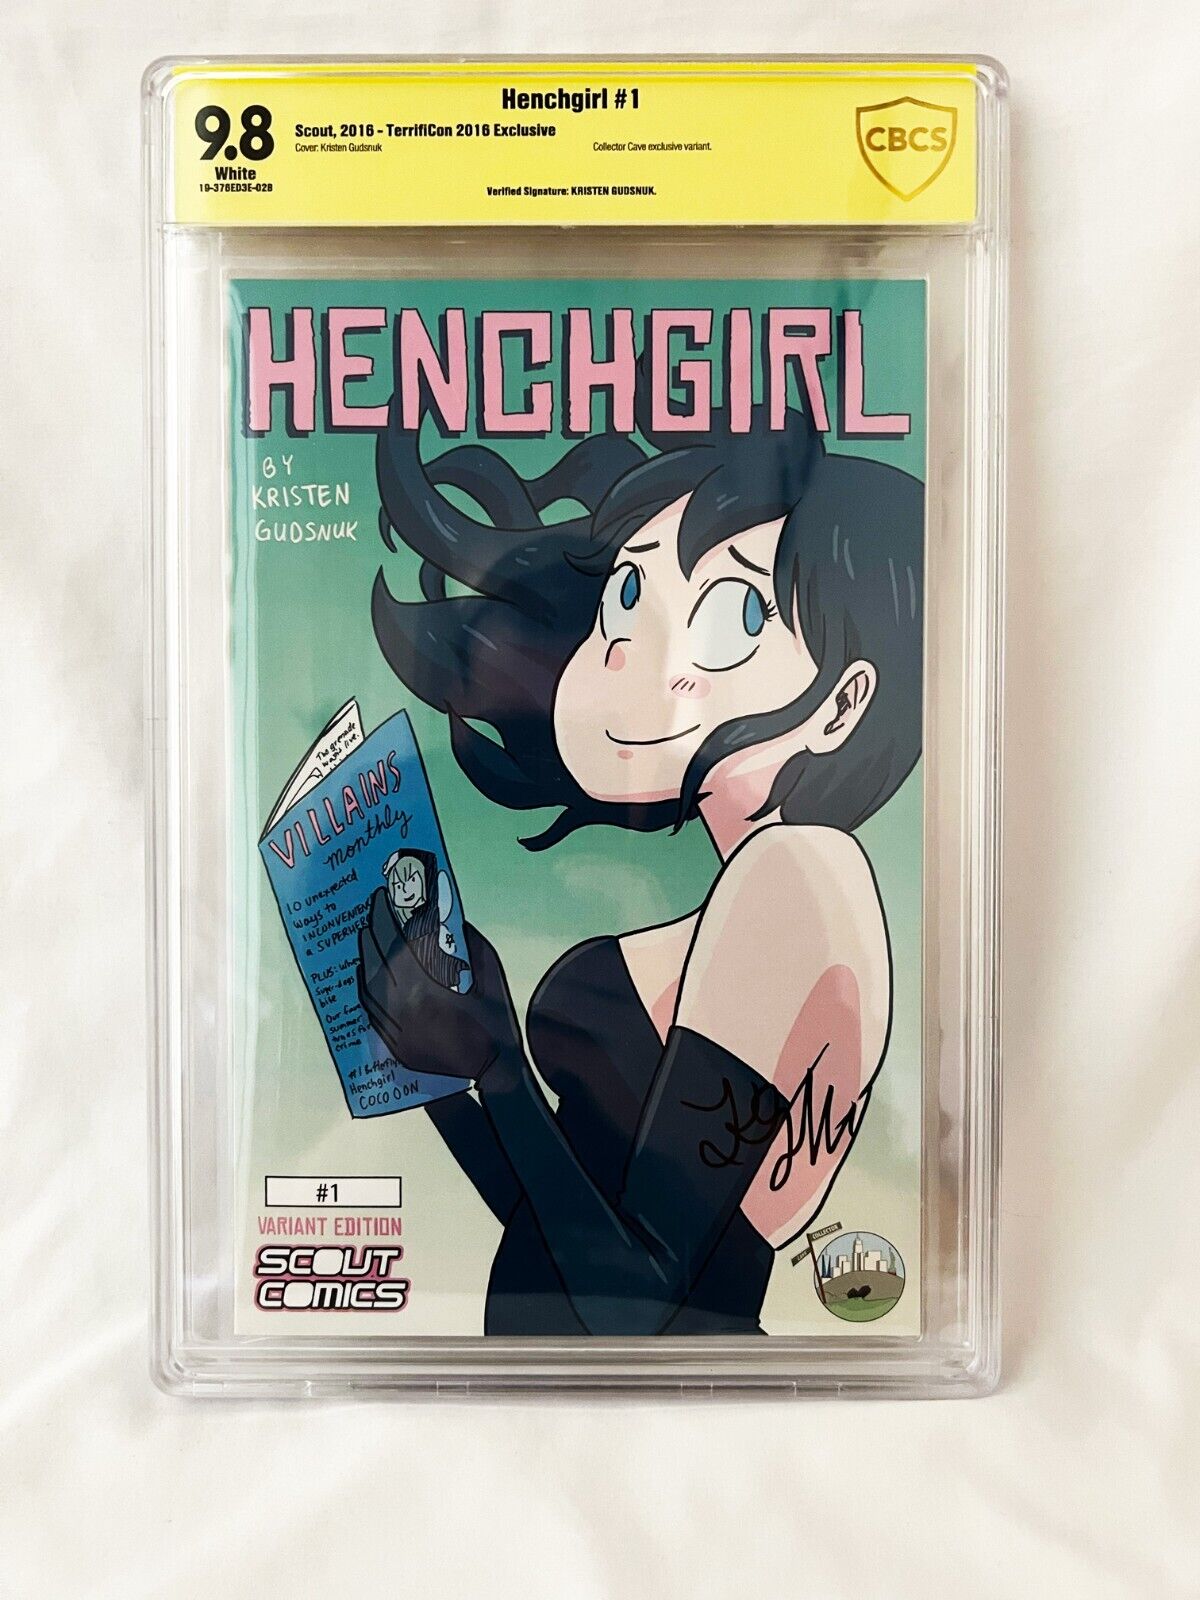 Henchgirl #1 CBCS 9.8 Signed By Kristen Gudsnuk TerrifiCon 2016 Exclusive